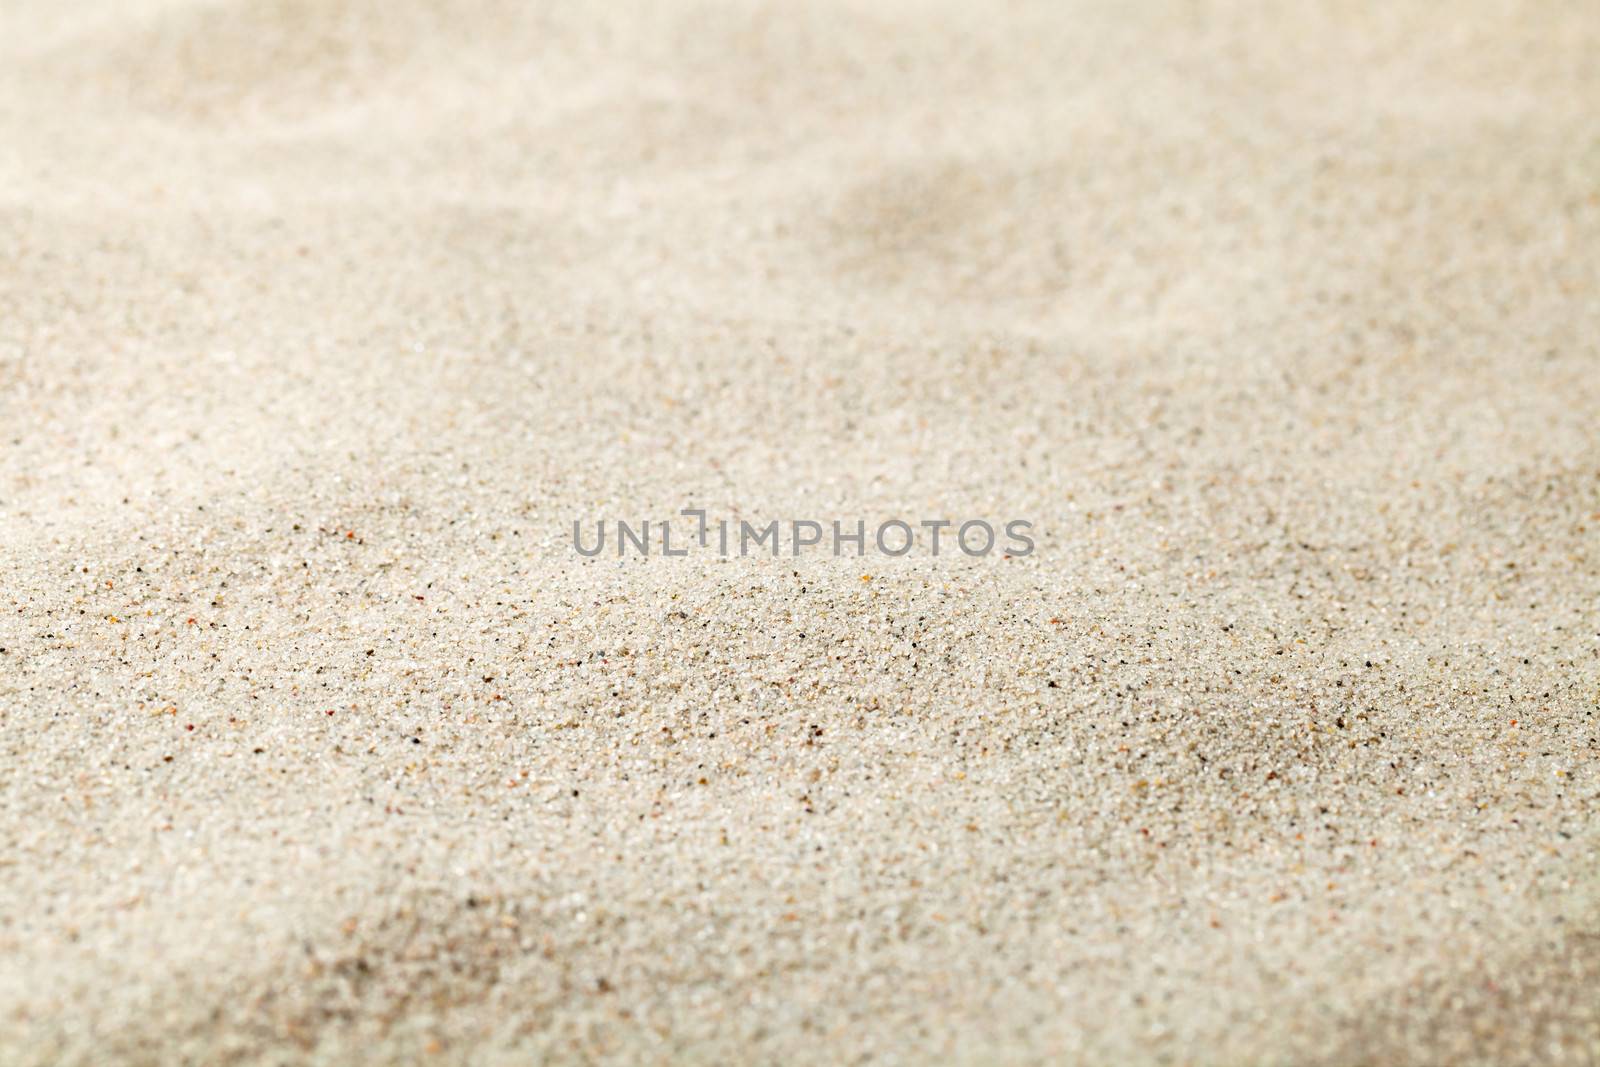 Sandy beach texture for background with copy space